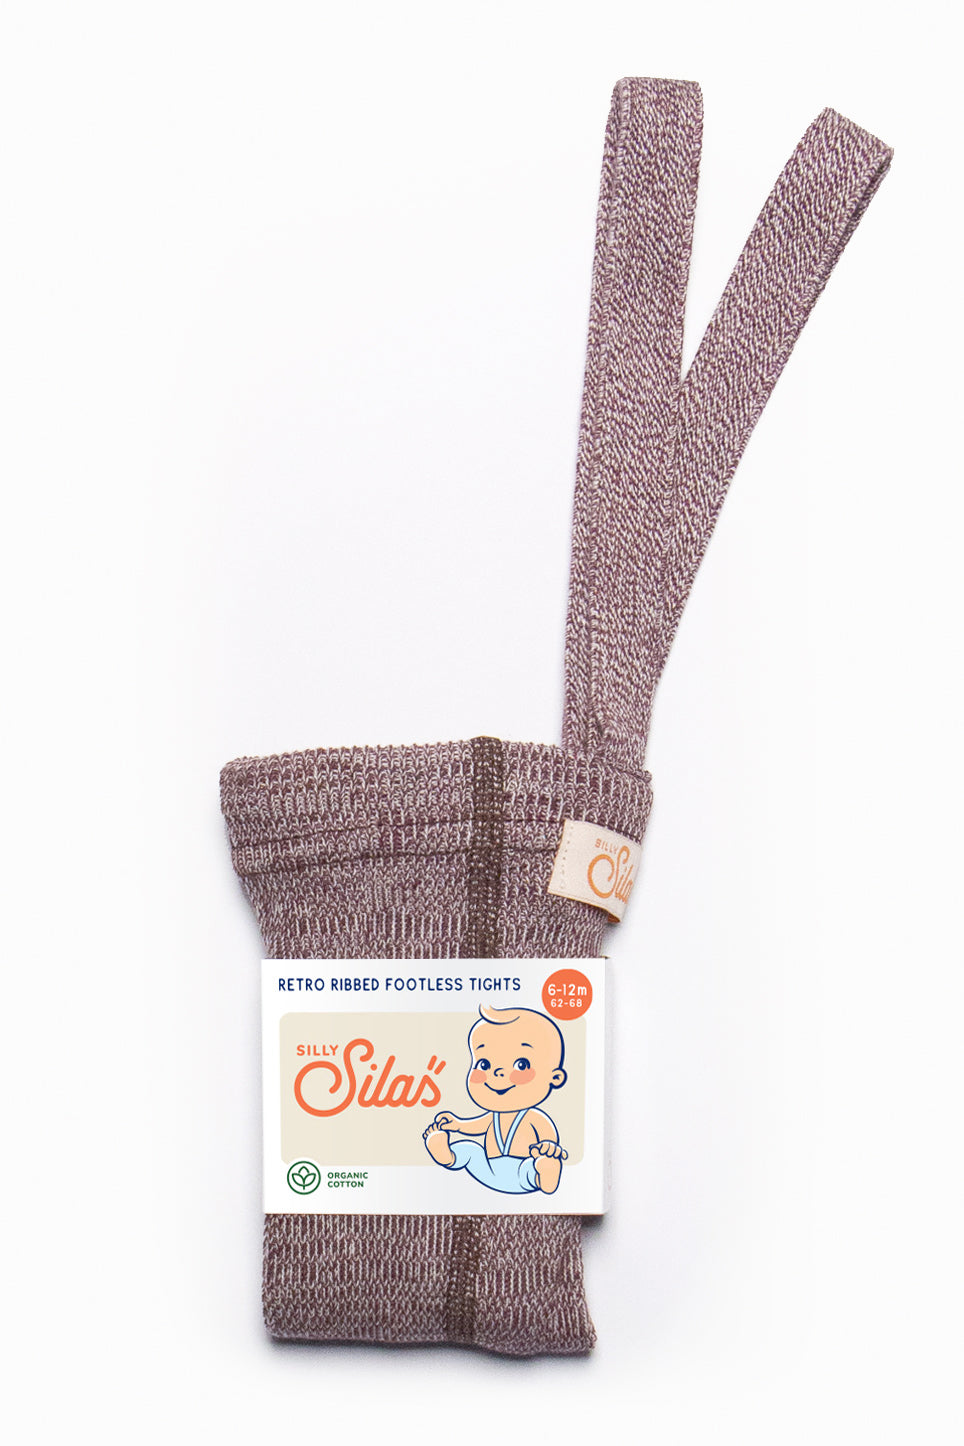 SILLY SILAS FOOTLESS COTTON TIGHTS / VANILLA FIG